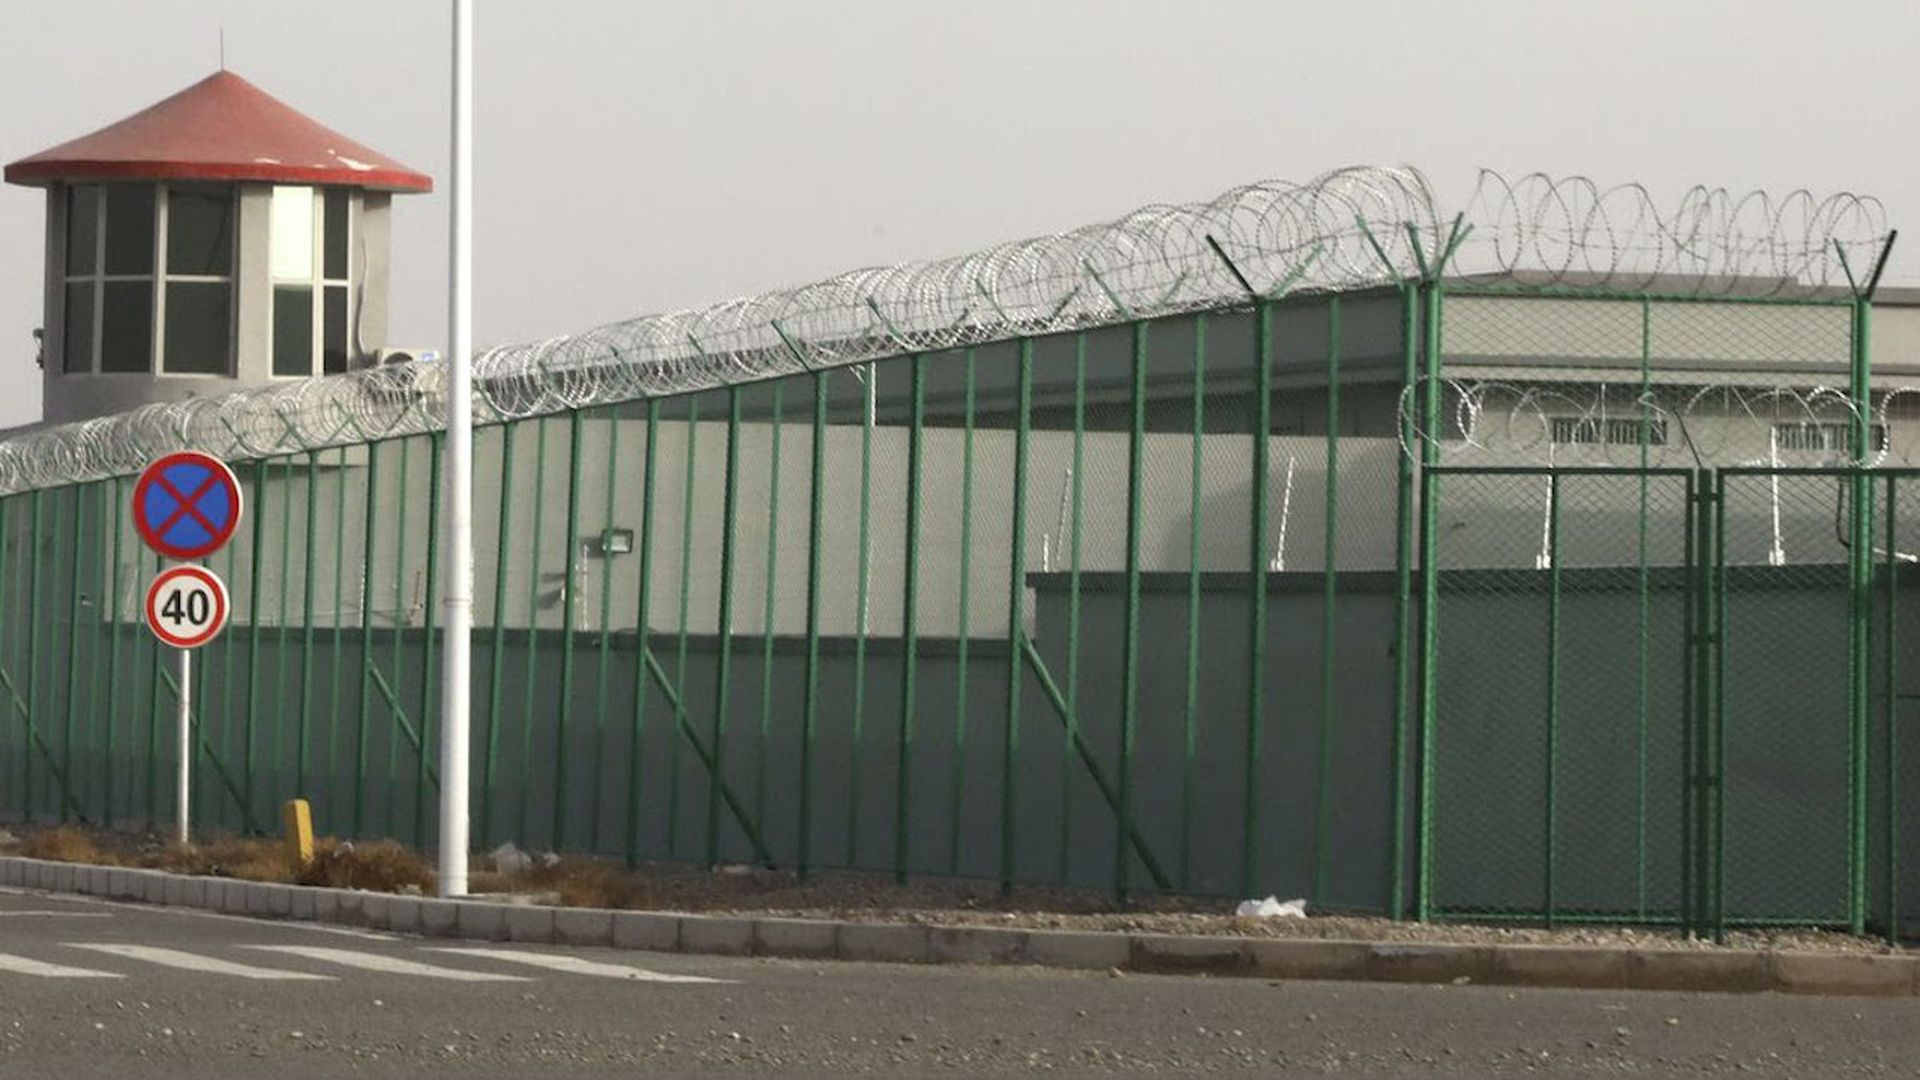 A Chinese detention facility in Kunshan Industrial Park in Artux, Xinjiang region